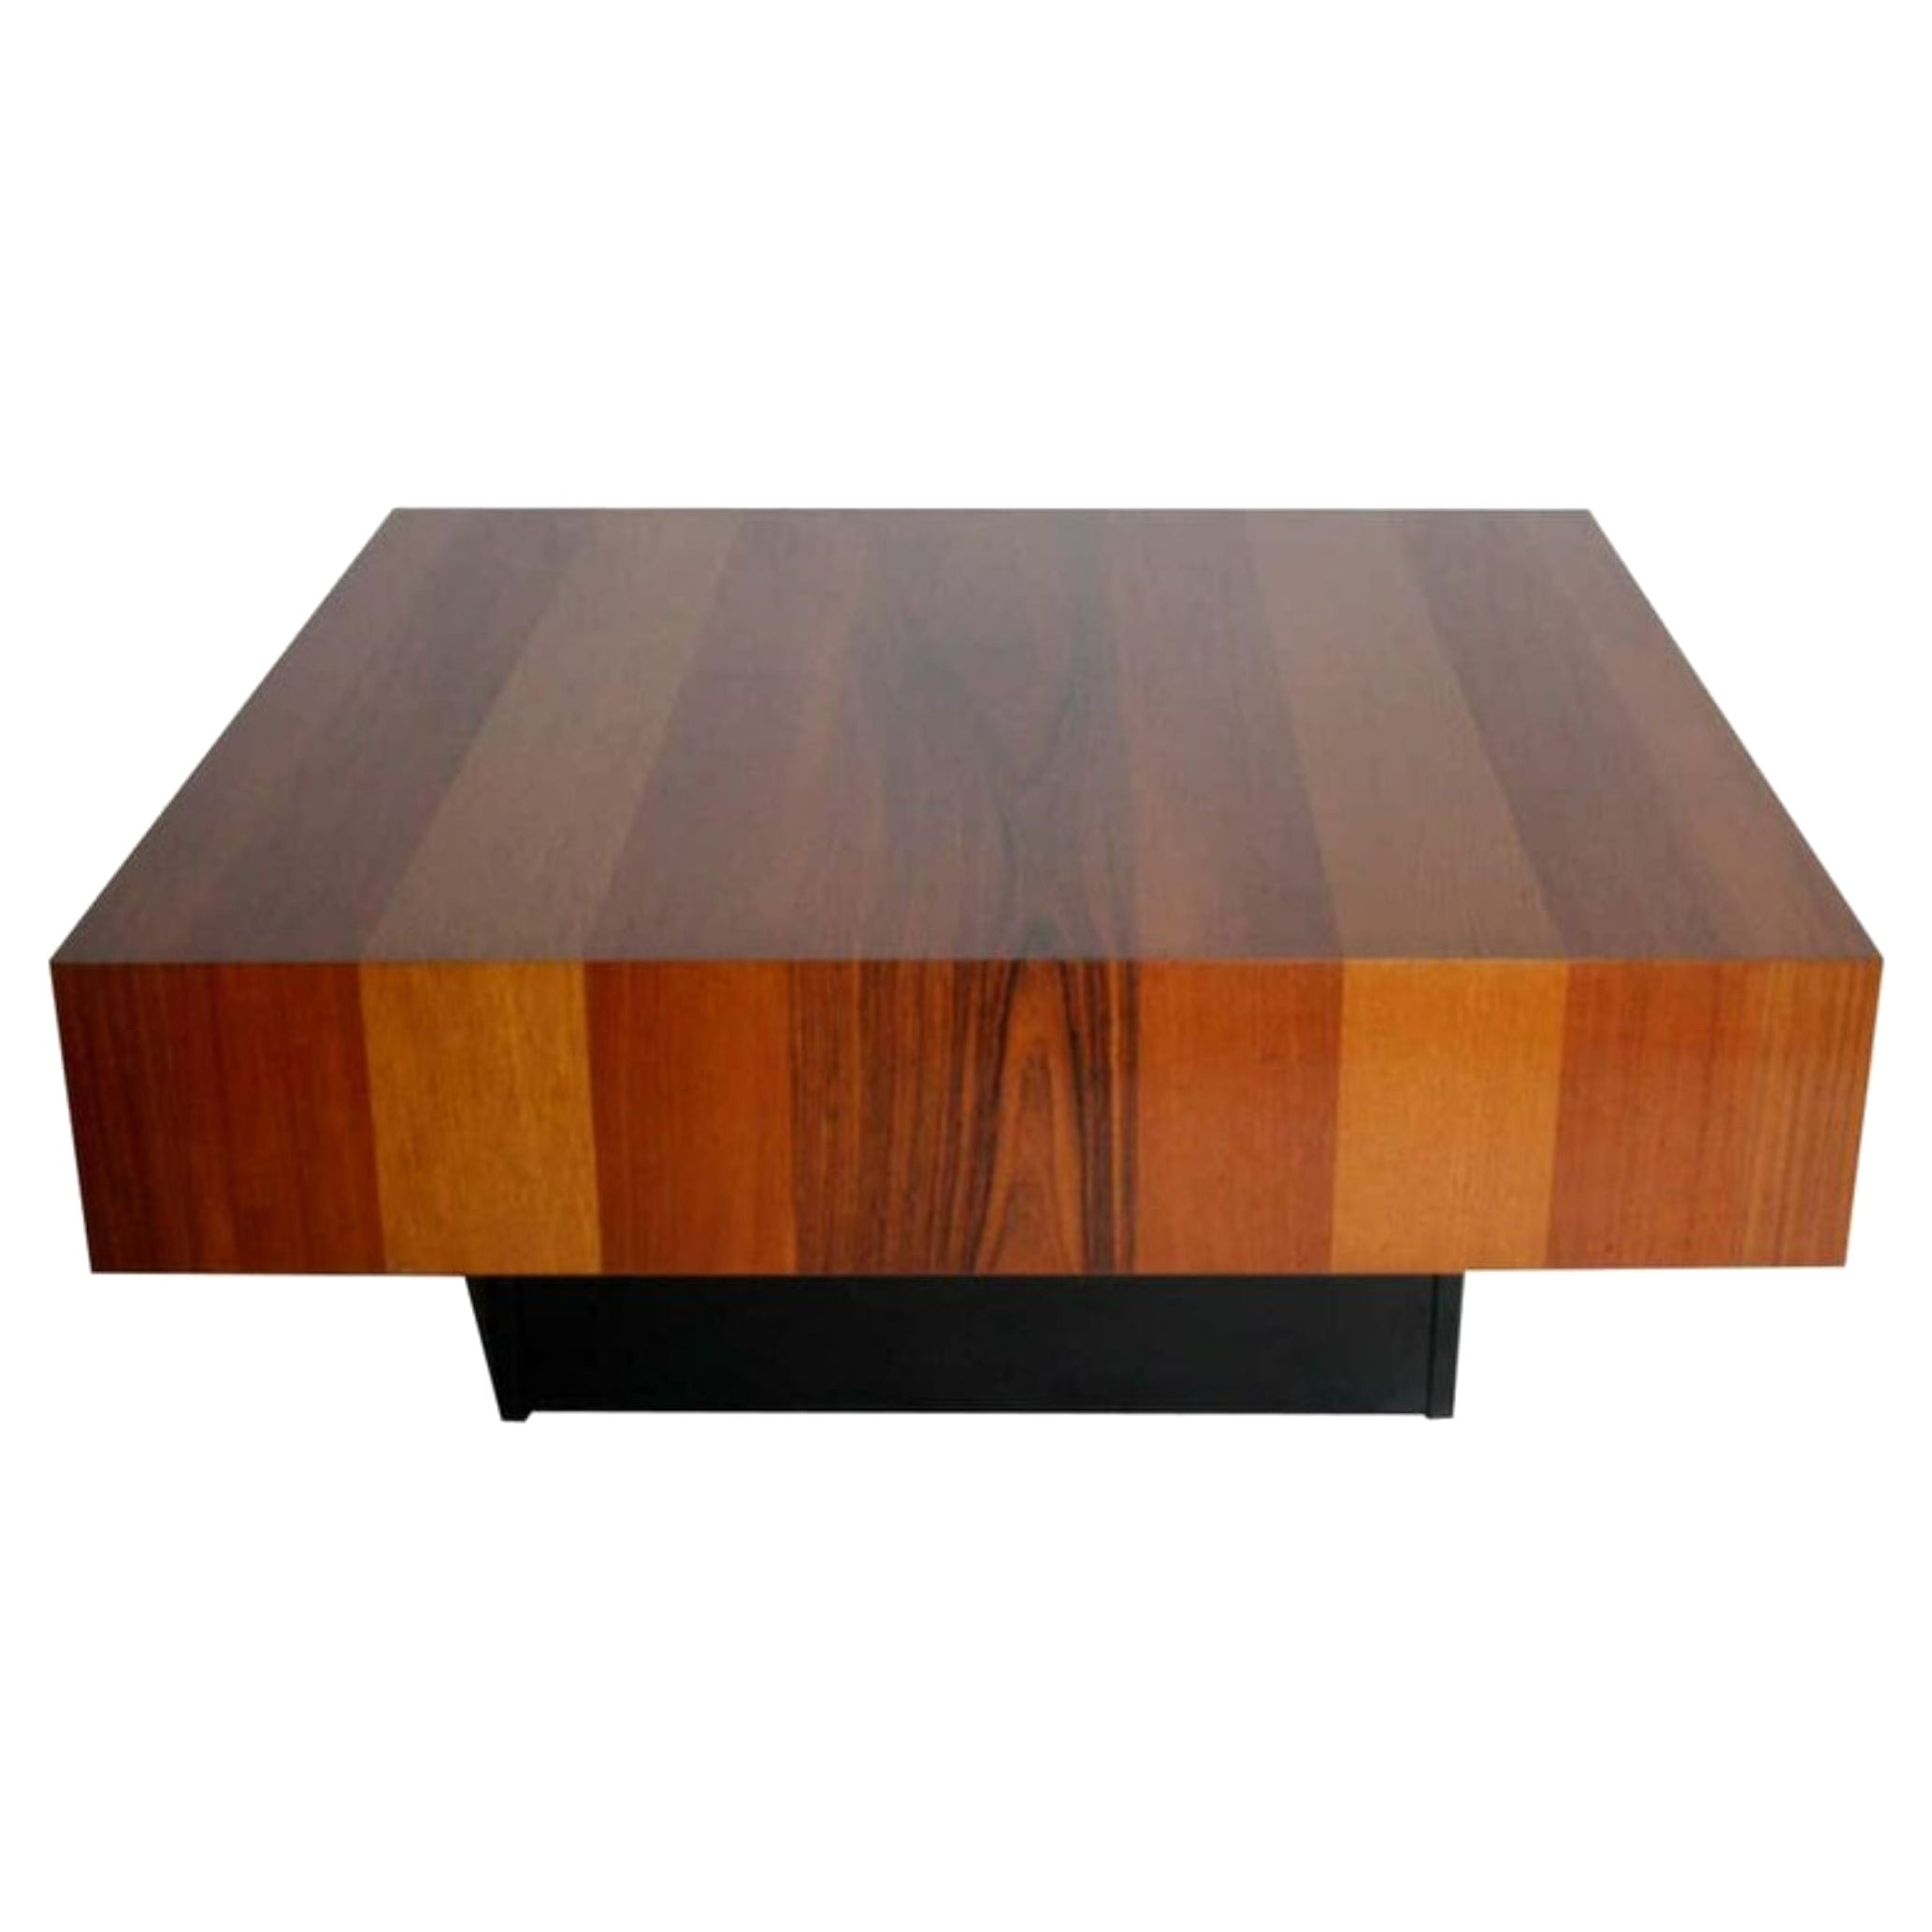 Danish Modern Mixed Wood Square Coffee Table by Drylund